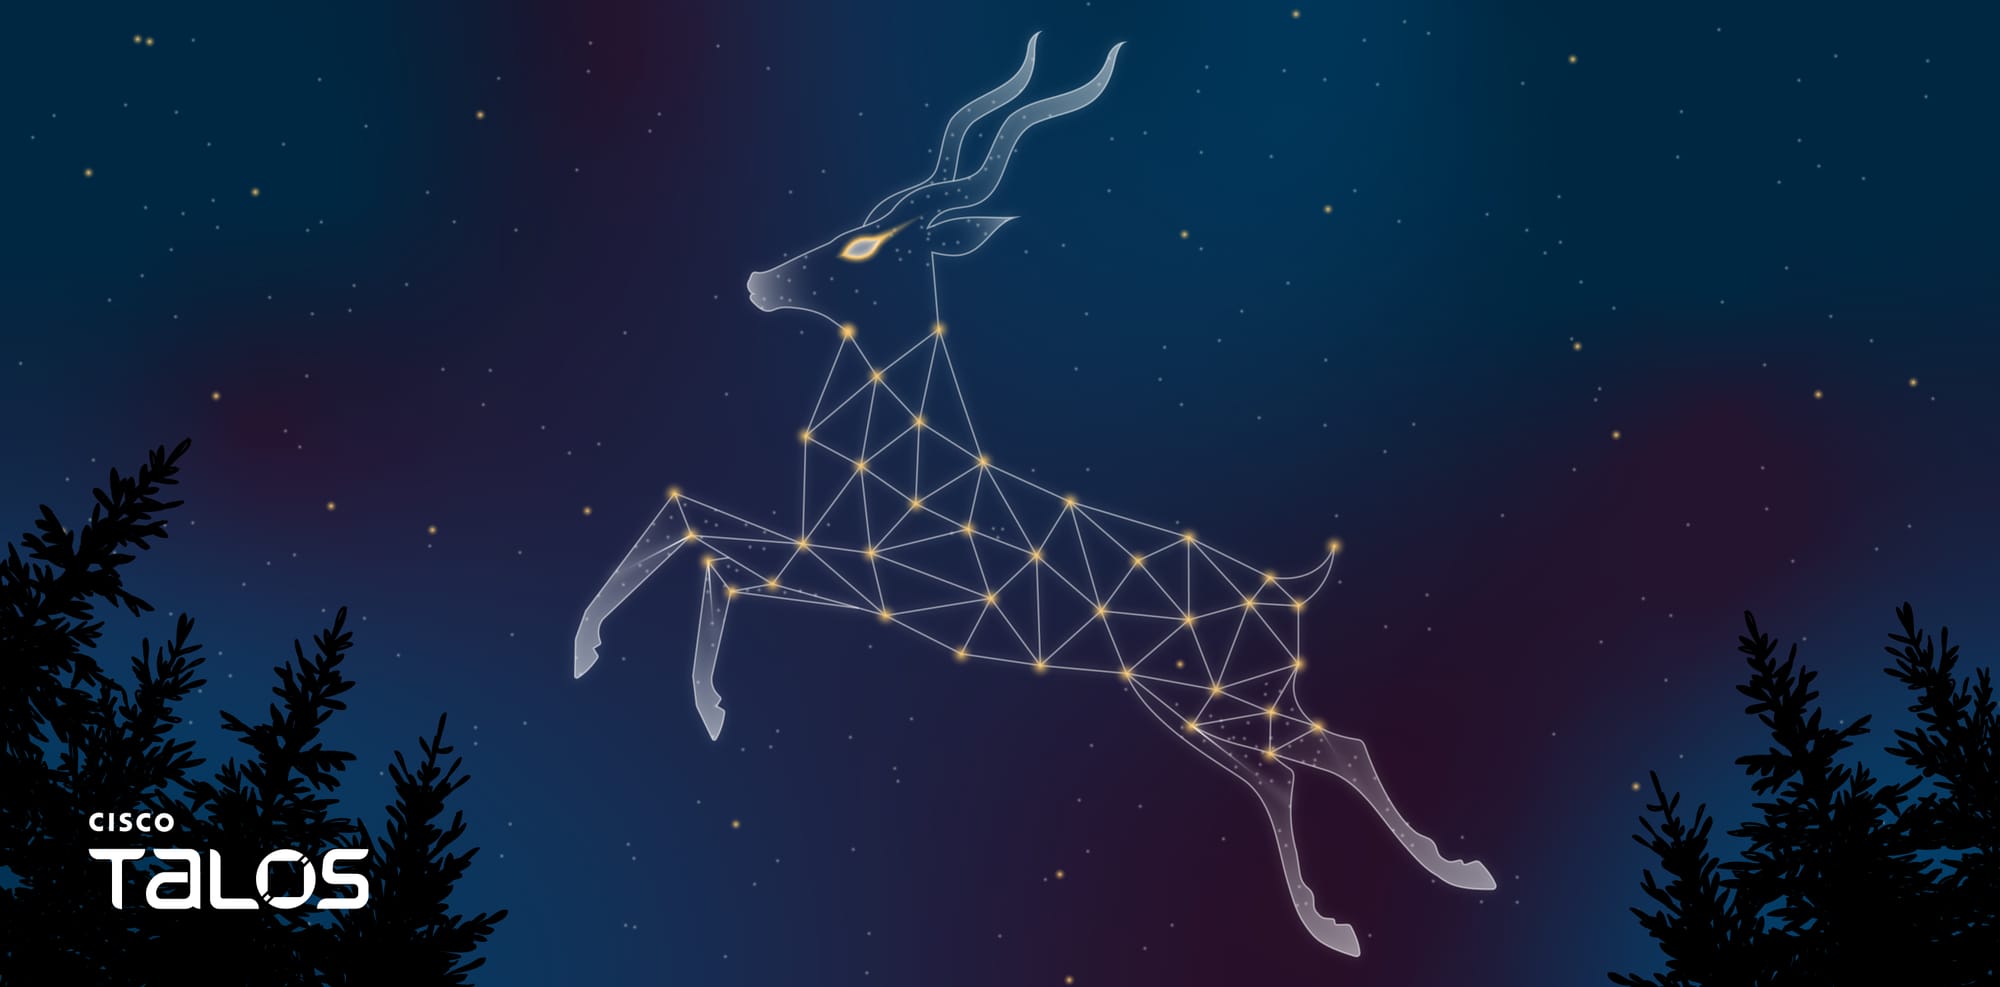 Starry Addax targets human rights defenders in North Africa with new malware